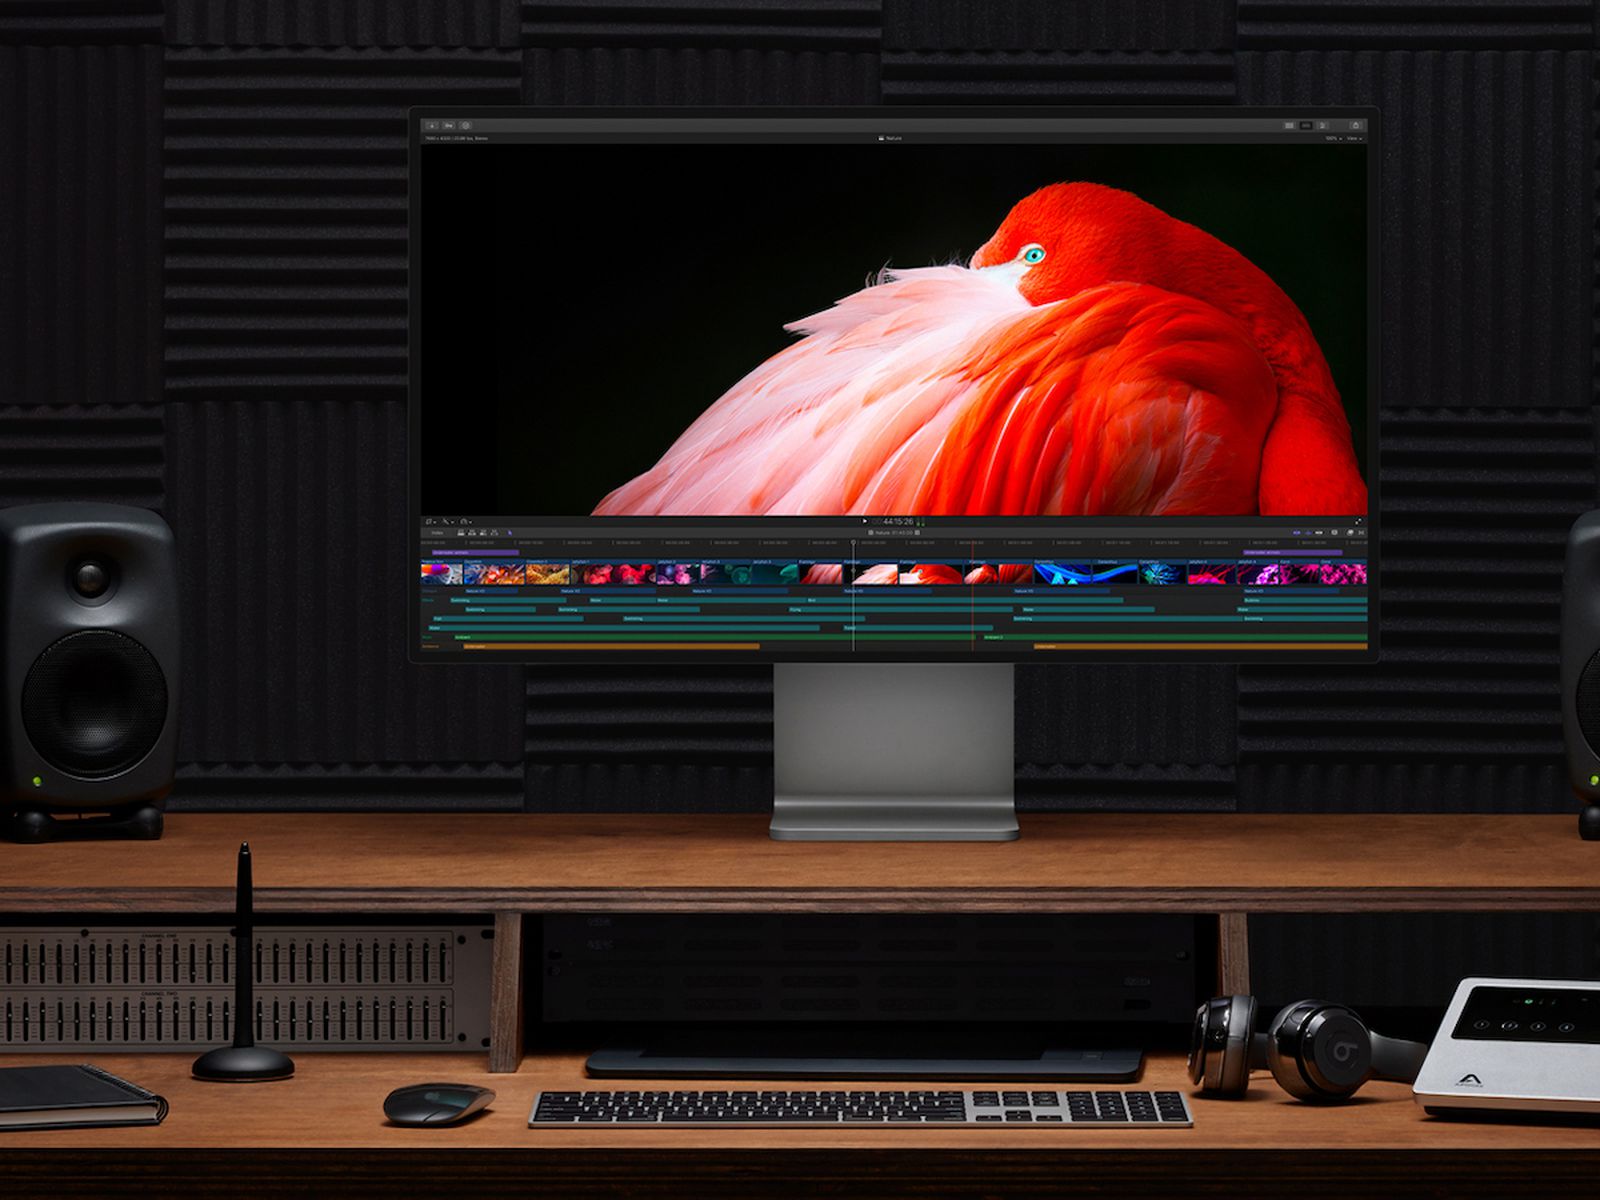 New Mac Studio and Mac Pro Support to Eight 4K Displays, Mac Pro Works These PCI Cards - MacRumors